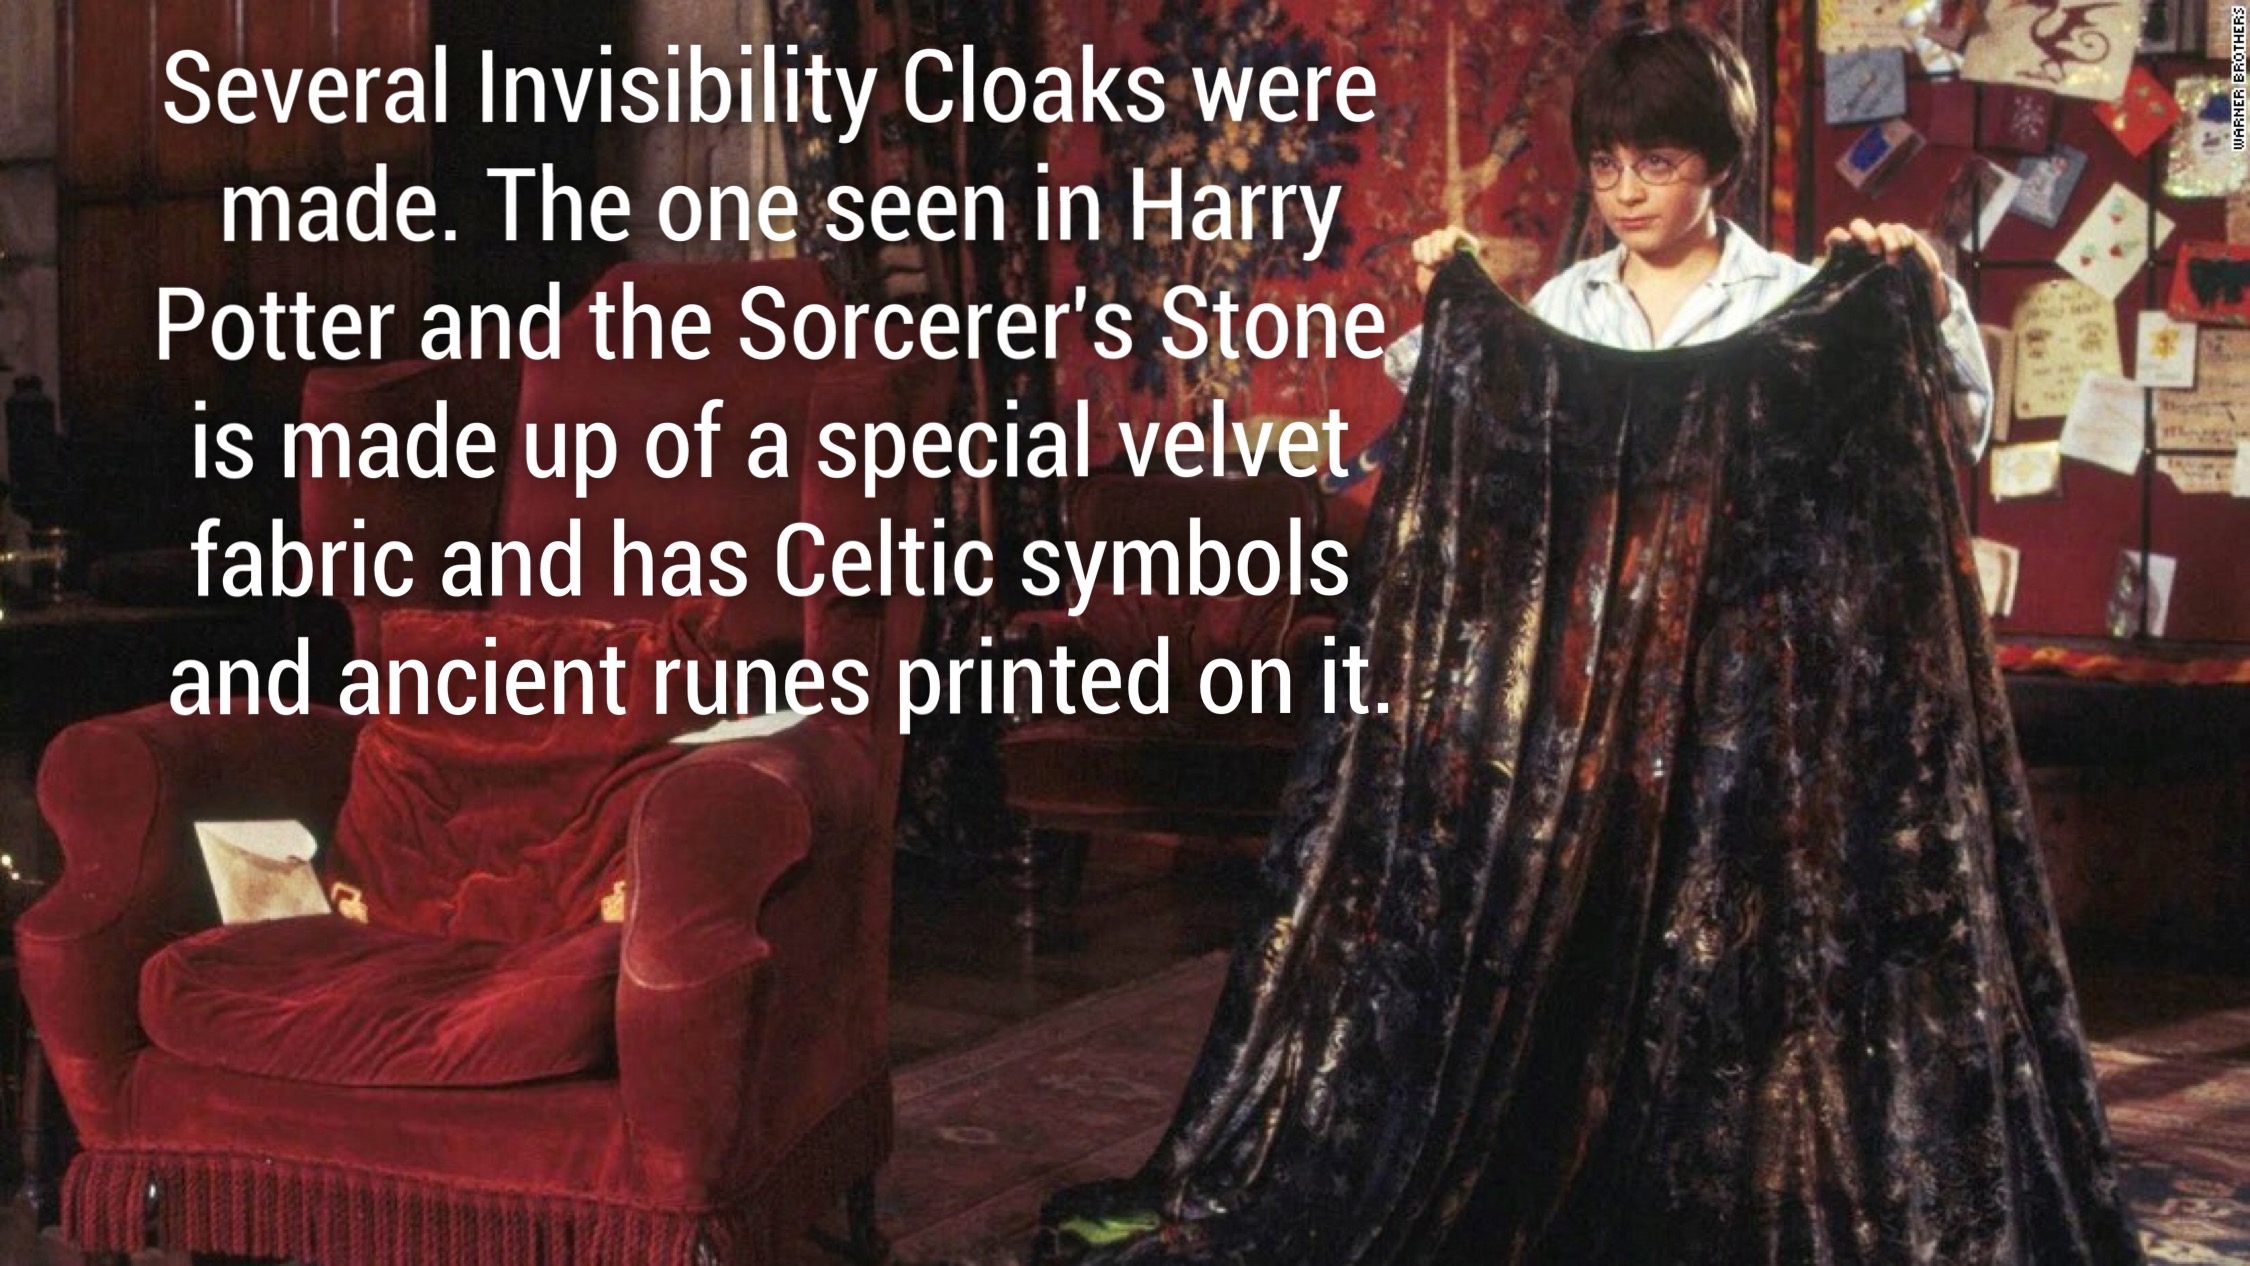 harry potter invisibility cloak - Several Invisibility Cloaks were made. The one seen in Harry Potter and the Sorcerer's Stone is made up of a special velvet fabric and has Celtic symbols and ancient runes printed on it.